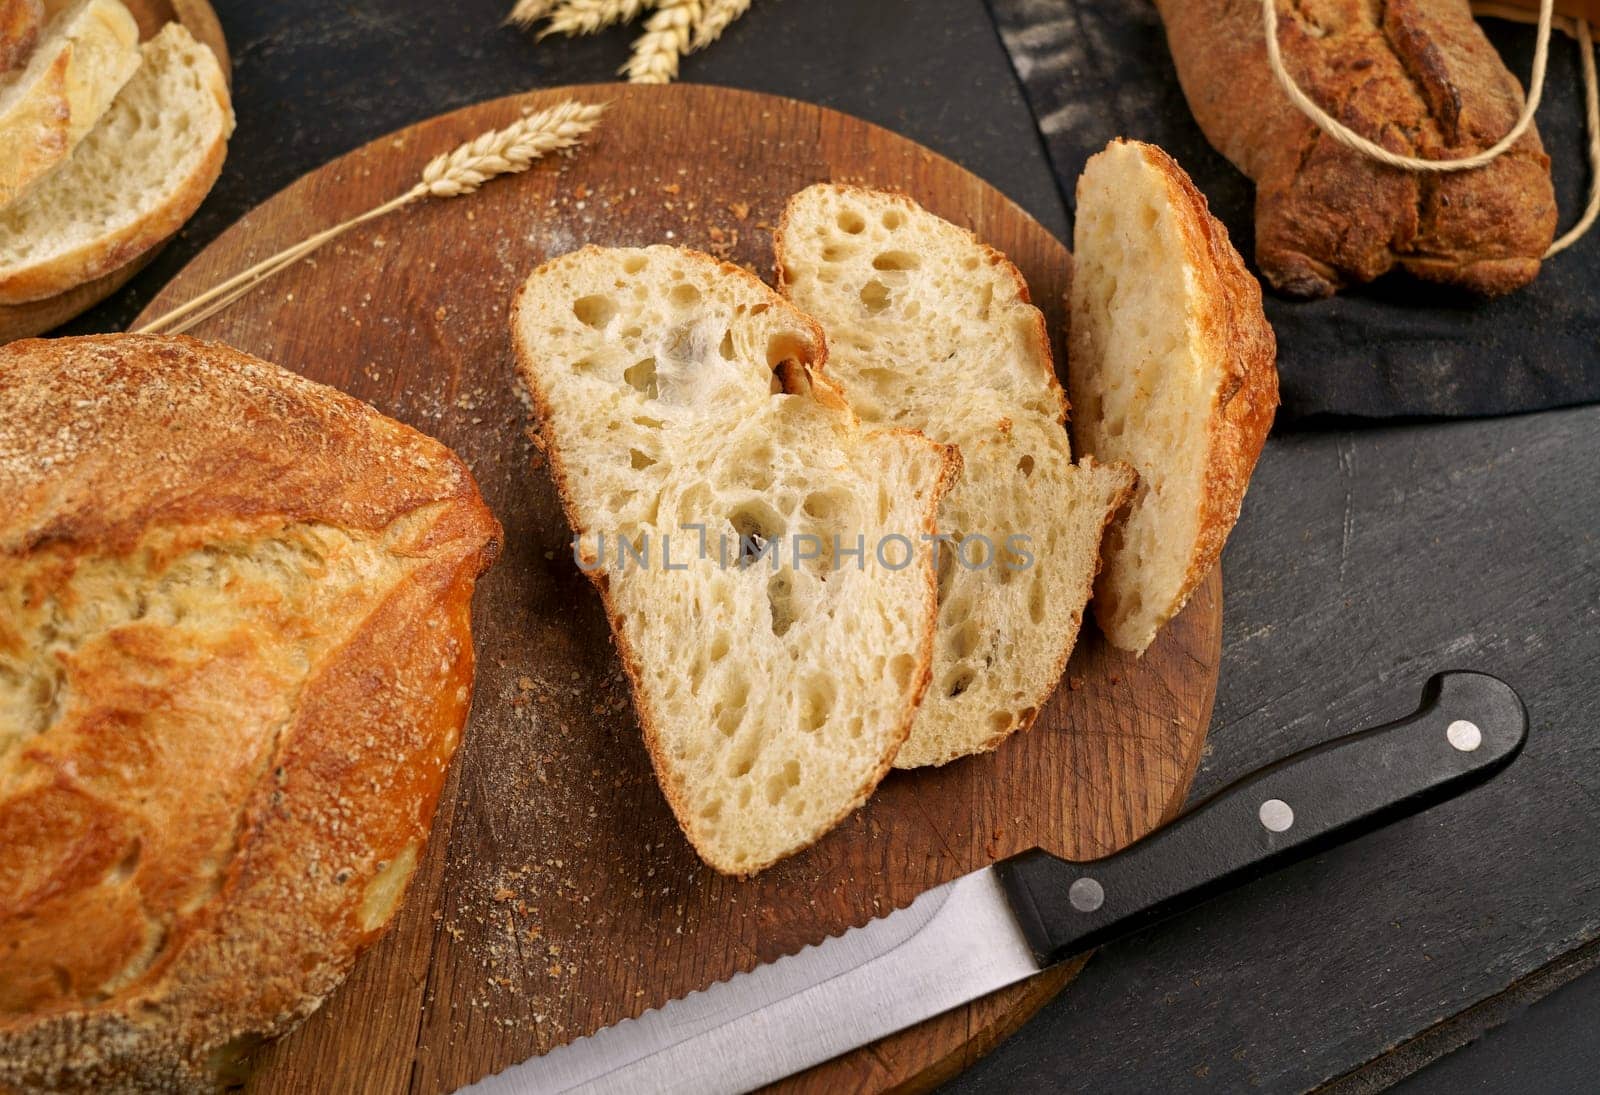 Fresh bread slice and cutting knife on rustic table Concept of homemade bread, natural farm products, domestic production. Healthy and tasty organic food. Round loaf of freshly baked sourdough bread with knife on cutting board. by aprilphoto